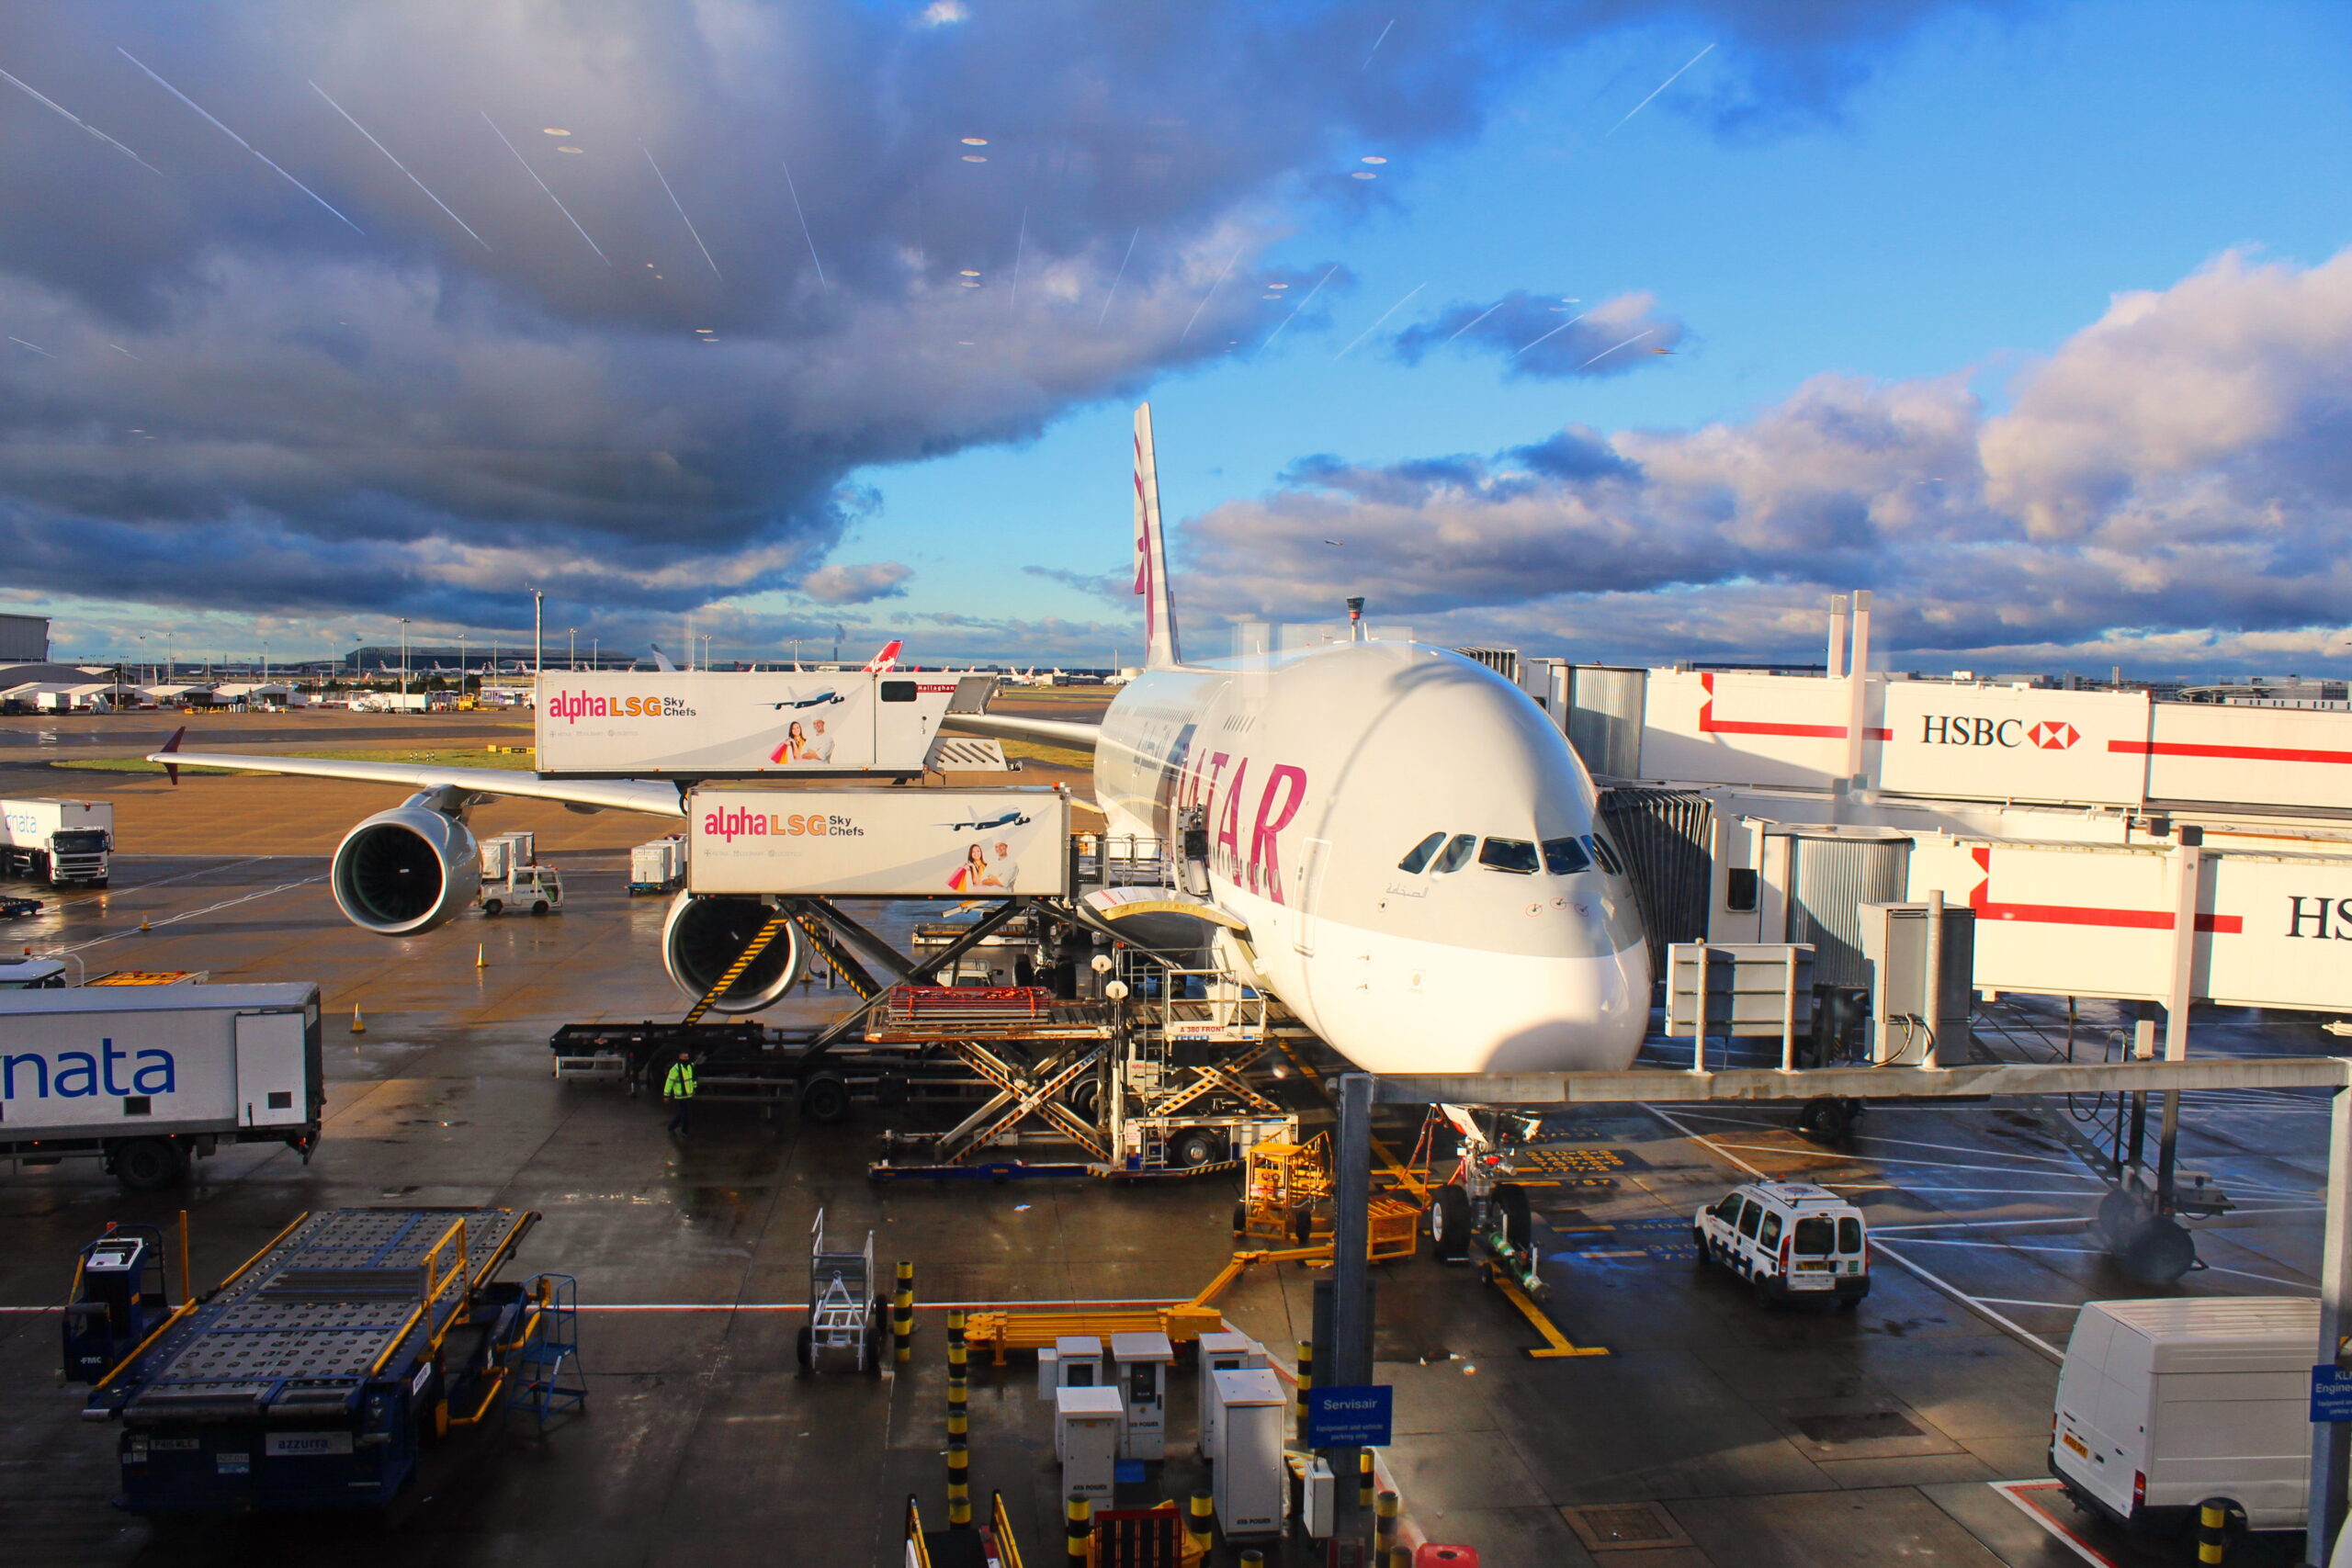 Aircraft at London Heathrow surrounded by ground handling equipment